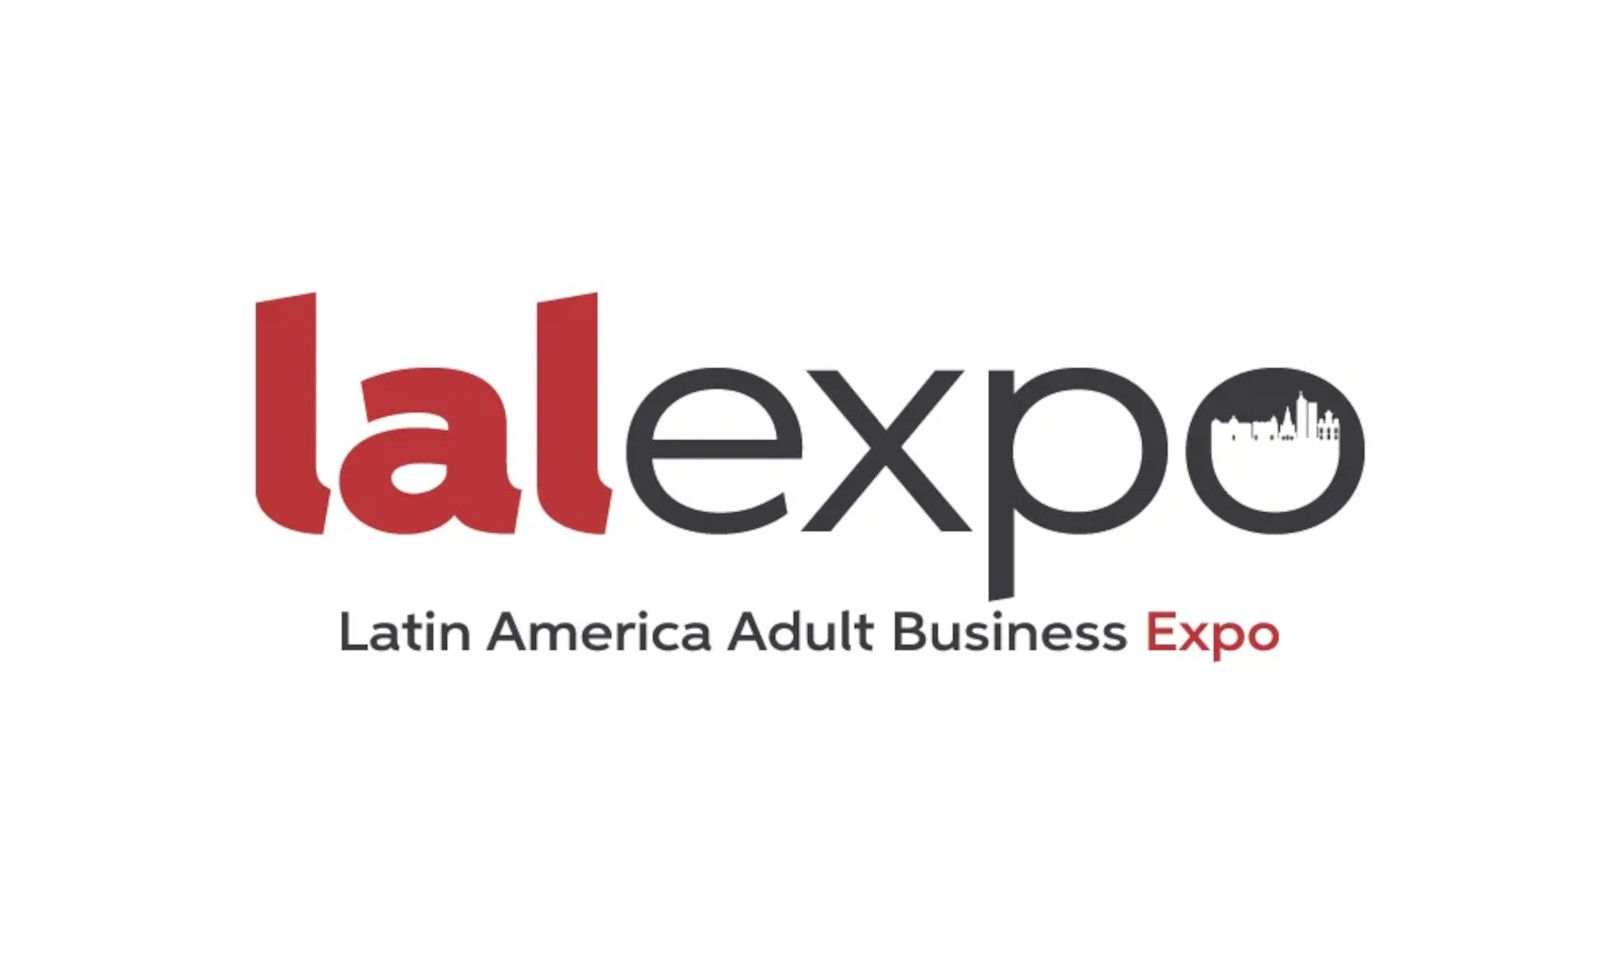 LALExpo Set to Open in Colombia, Announces Upcoming Events